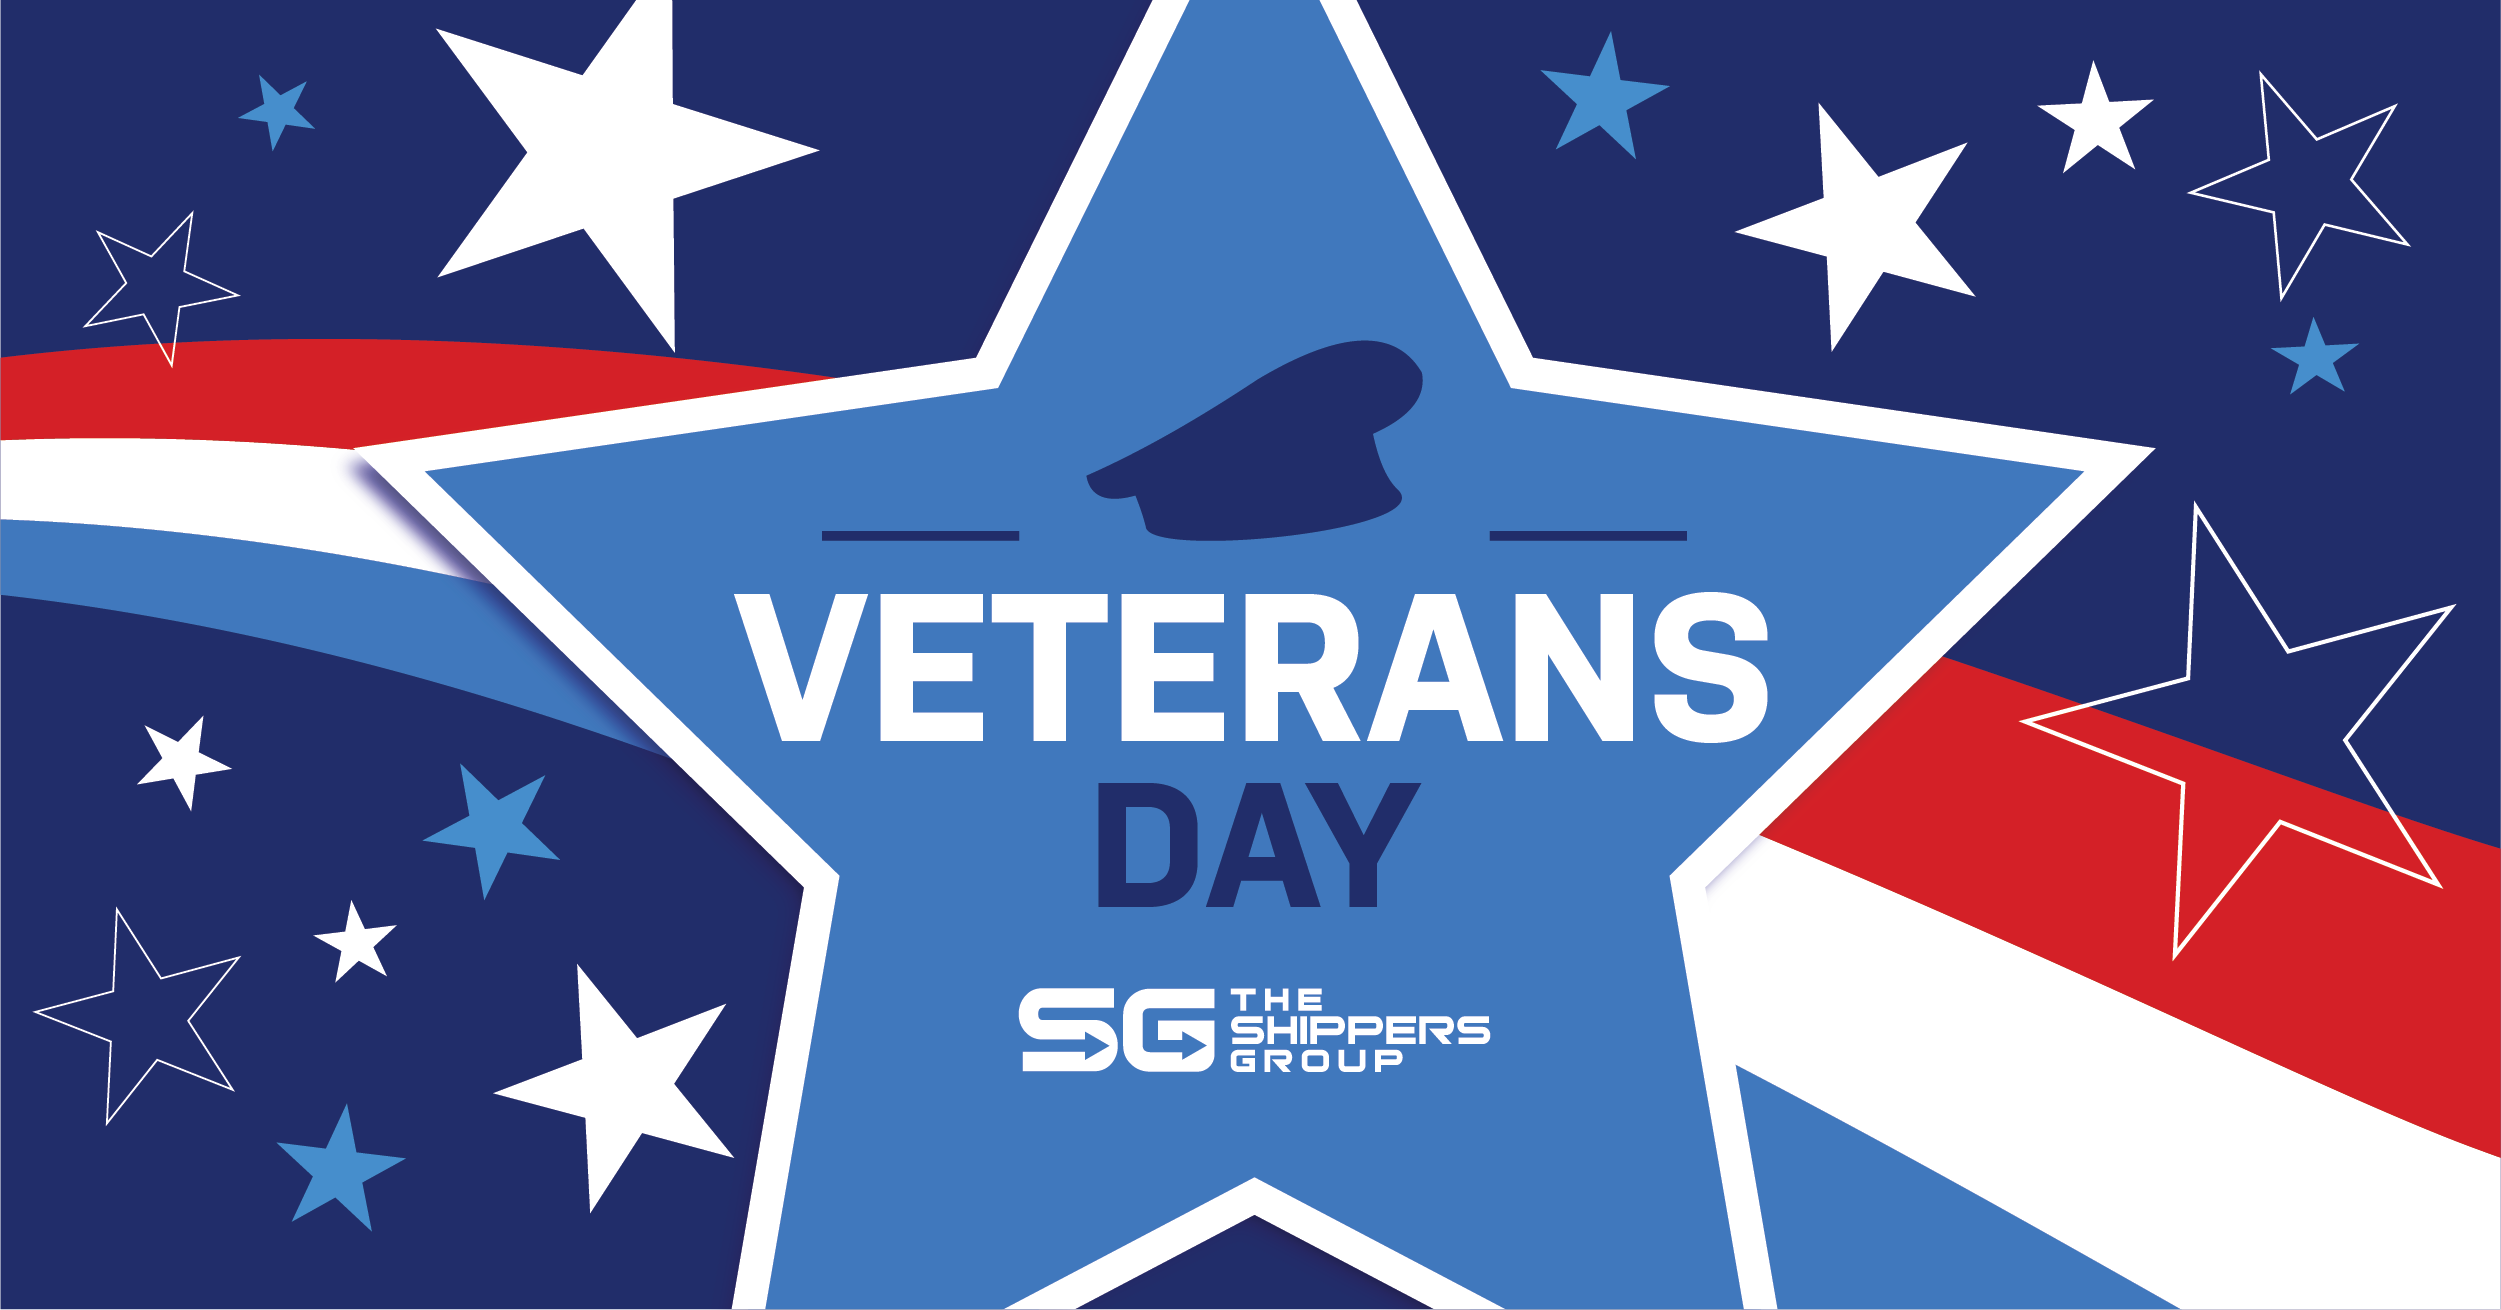 The Shippers Group Veterans Day graphic